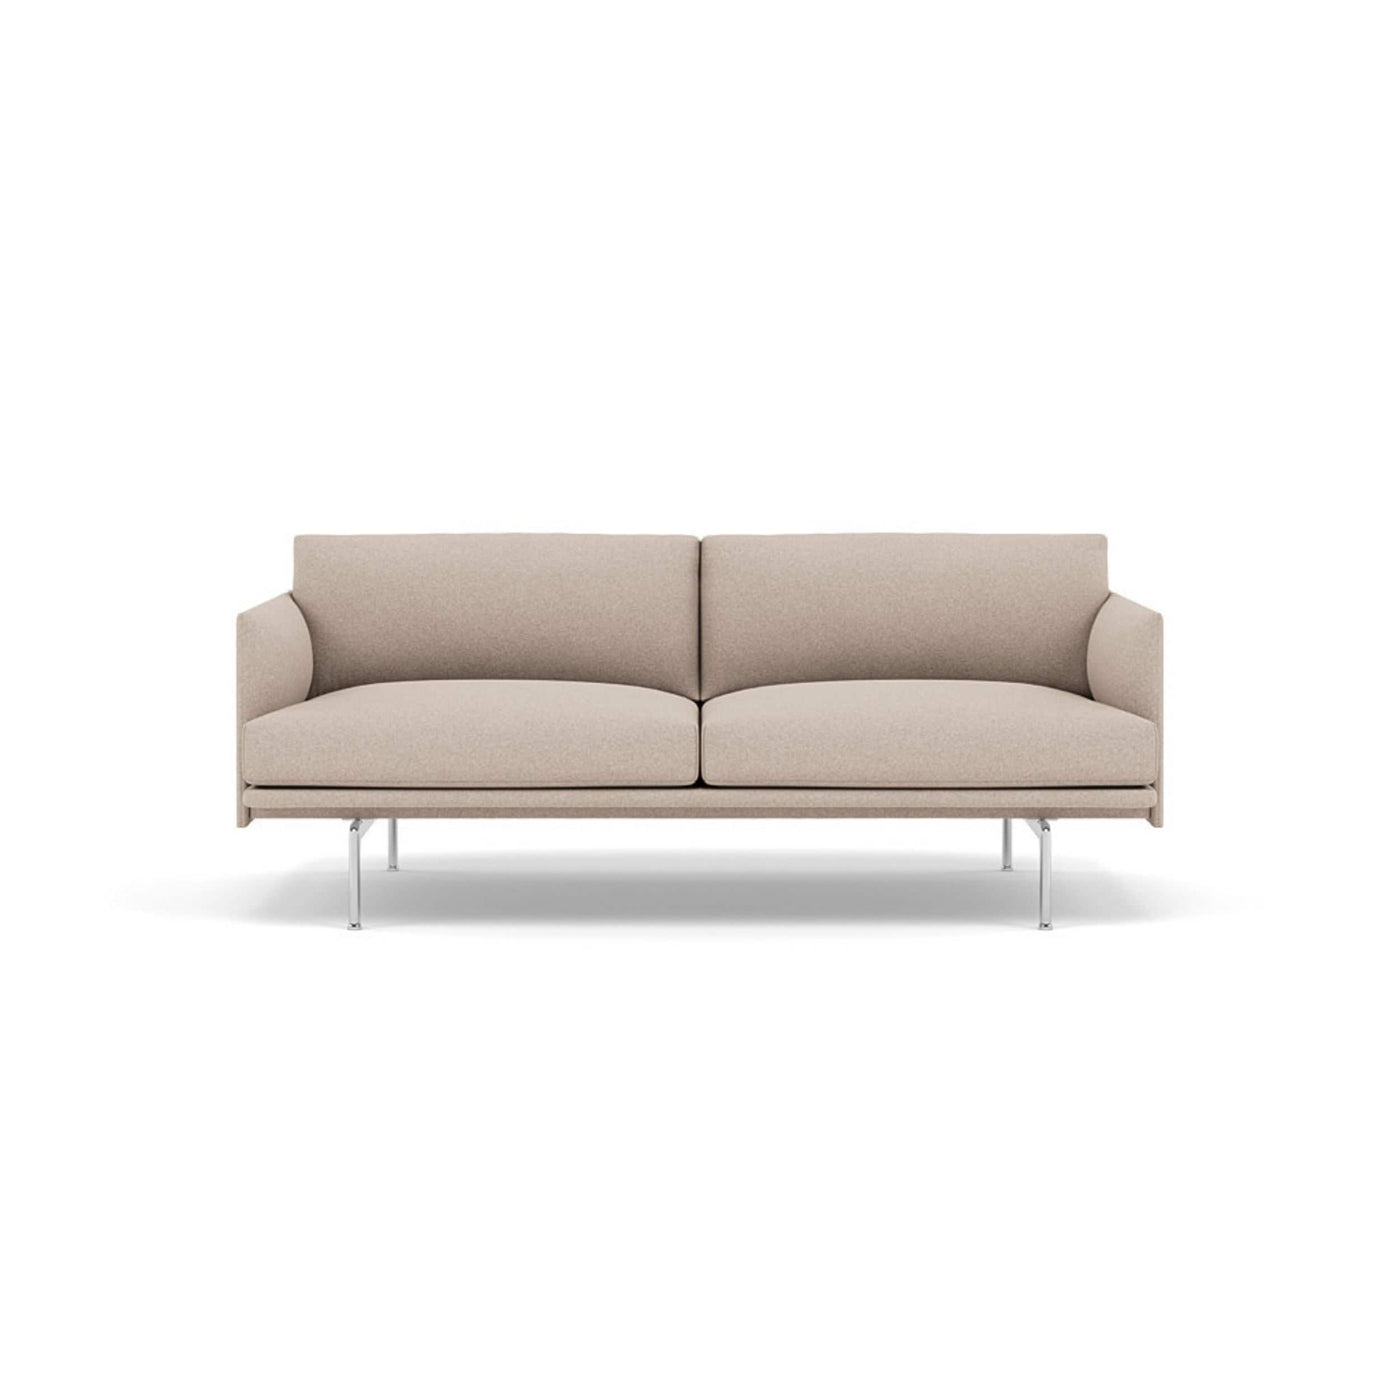 Muuto outline 2 seater sofa in divina md 213 natural fabric and polished aluminium legs. Made to order from someday designs. #colour_divina-md-213-natural